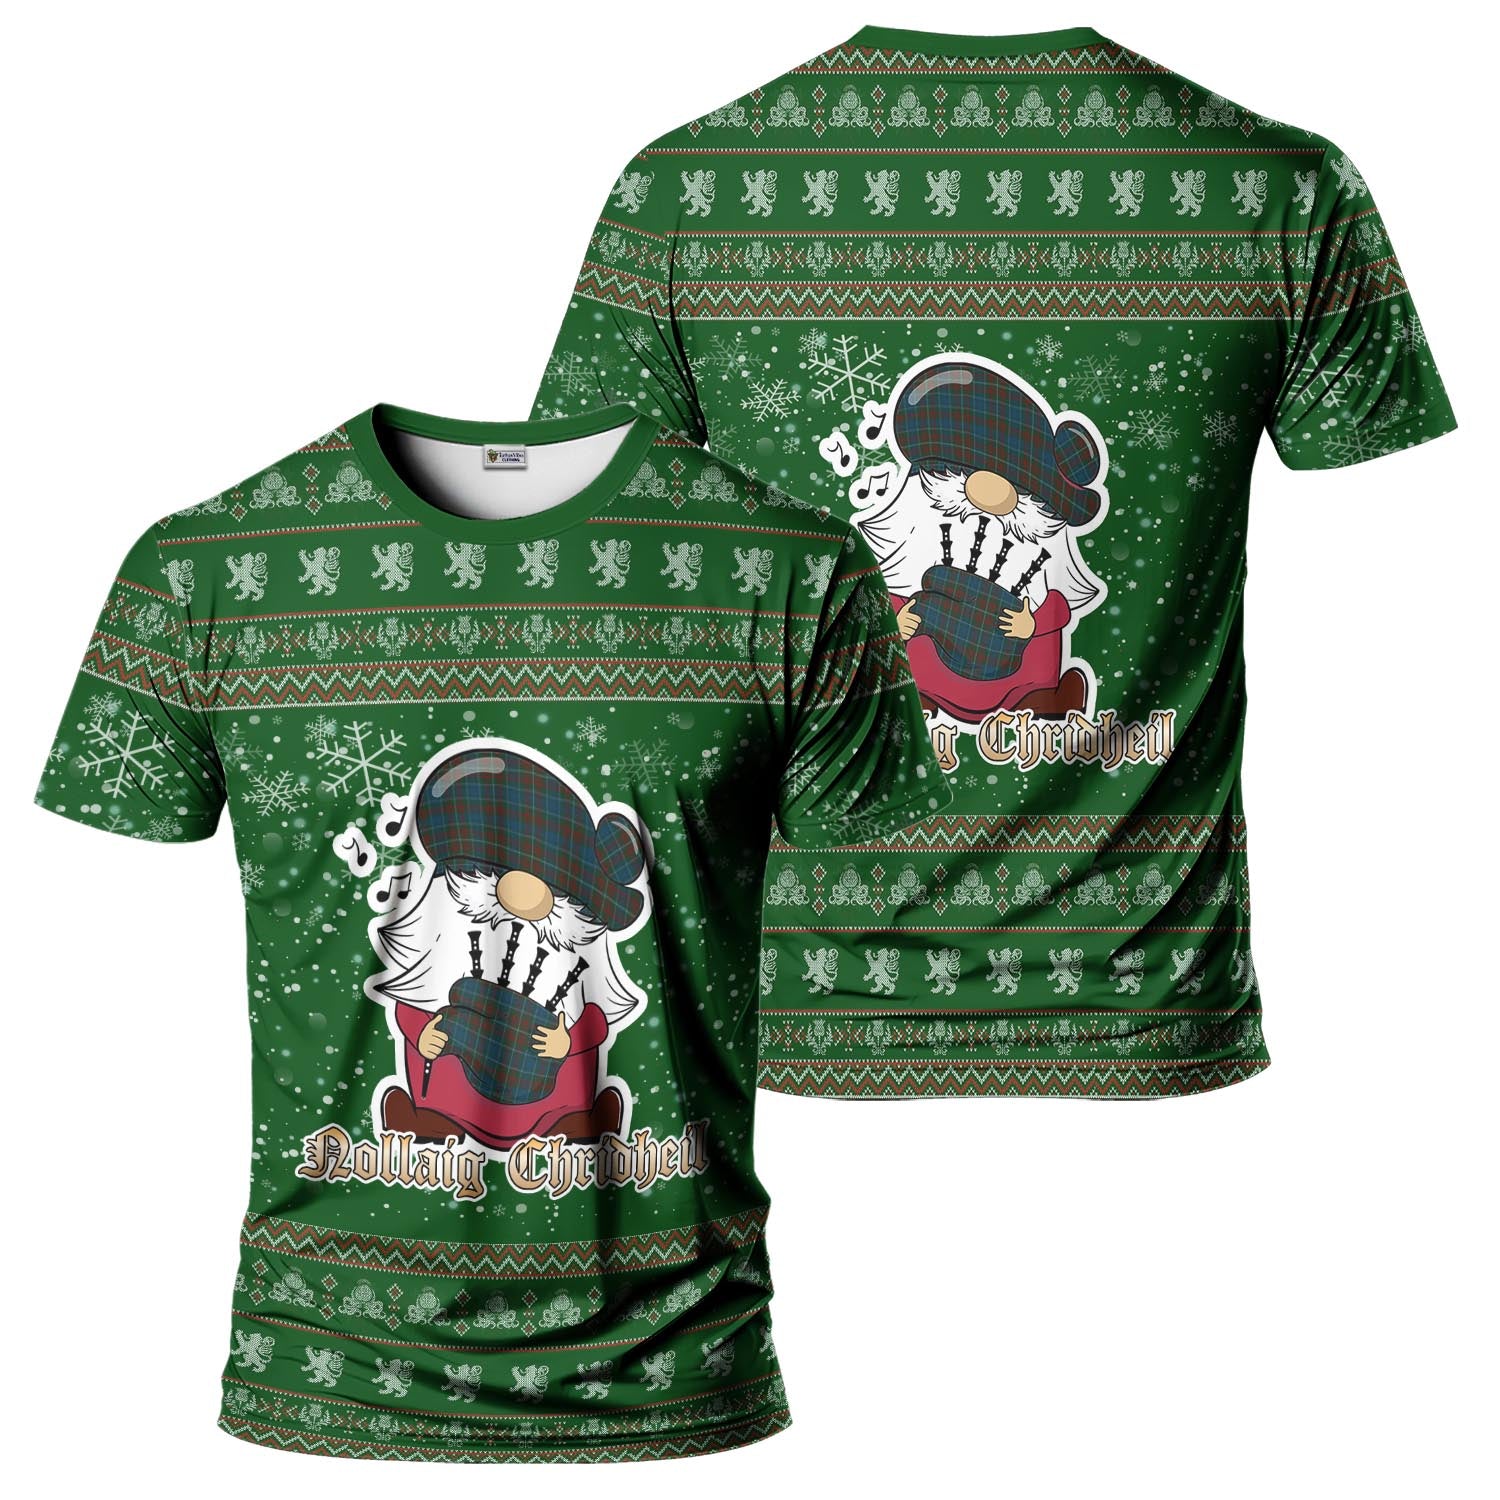 MacConnell Clan Christmas Family T-Shirt with Funny Gnome Playing Bagpipes Men's Shirt Green - Tartanvibesclothing